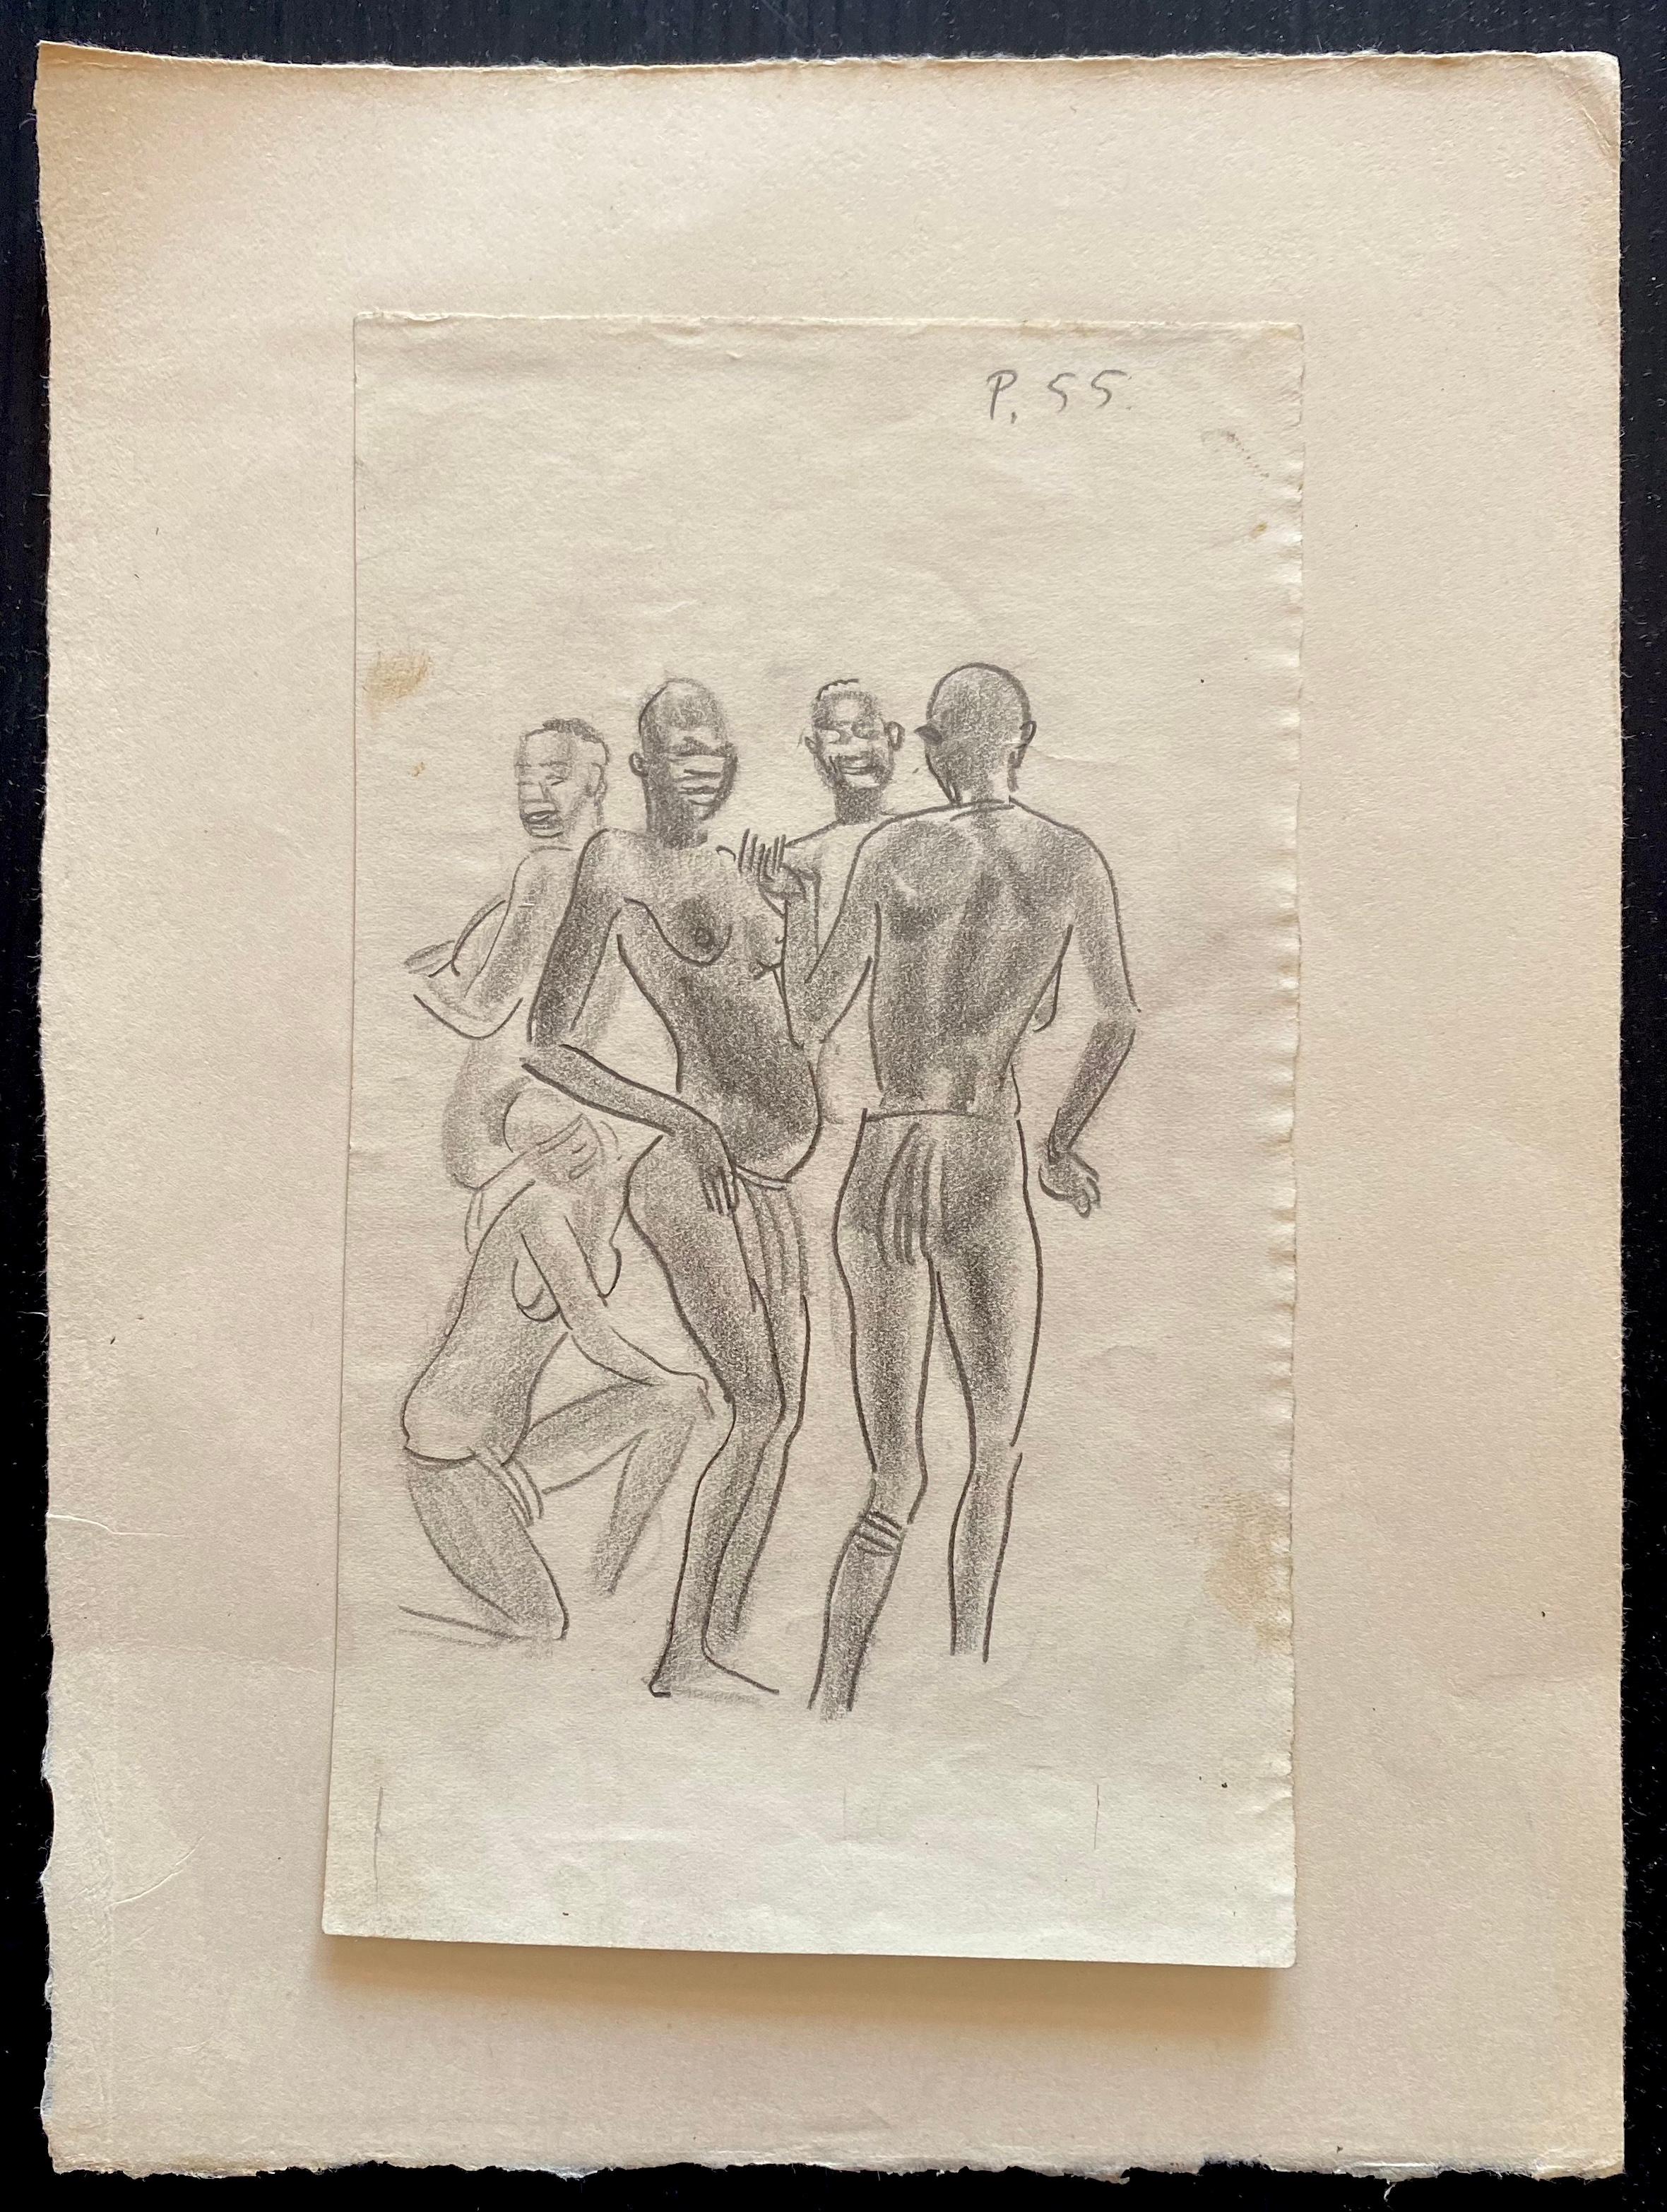 Figures is an original drawing in pencil on paper by Emmanuel Gondouin in 1930 ca.

In Good condition with diffused foxing.

Not signed.

This artwork represents several figures The artwork is depicted through strong strokes in a well-balanced